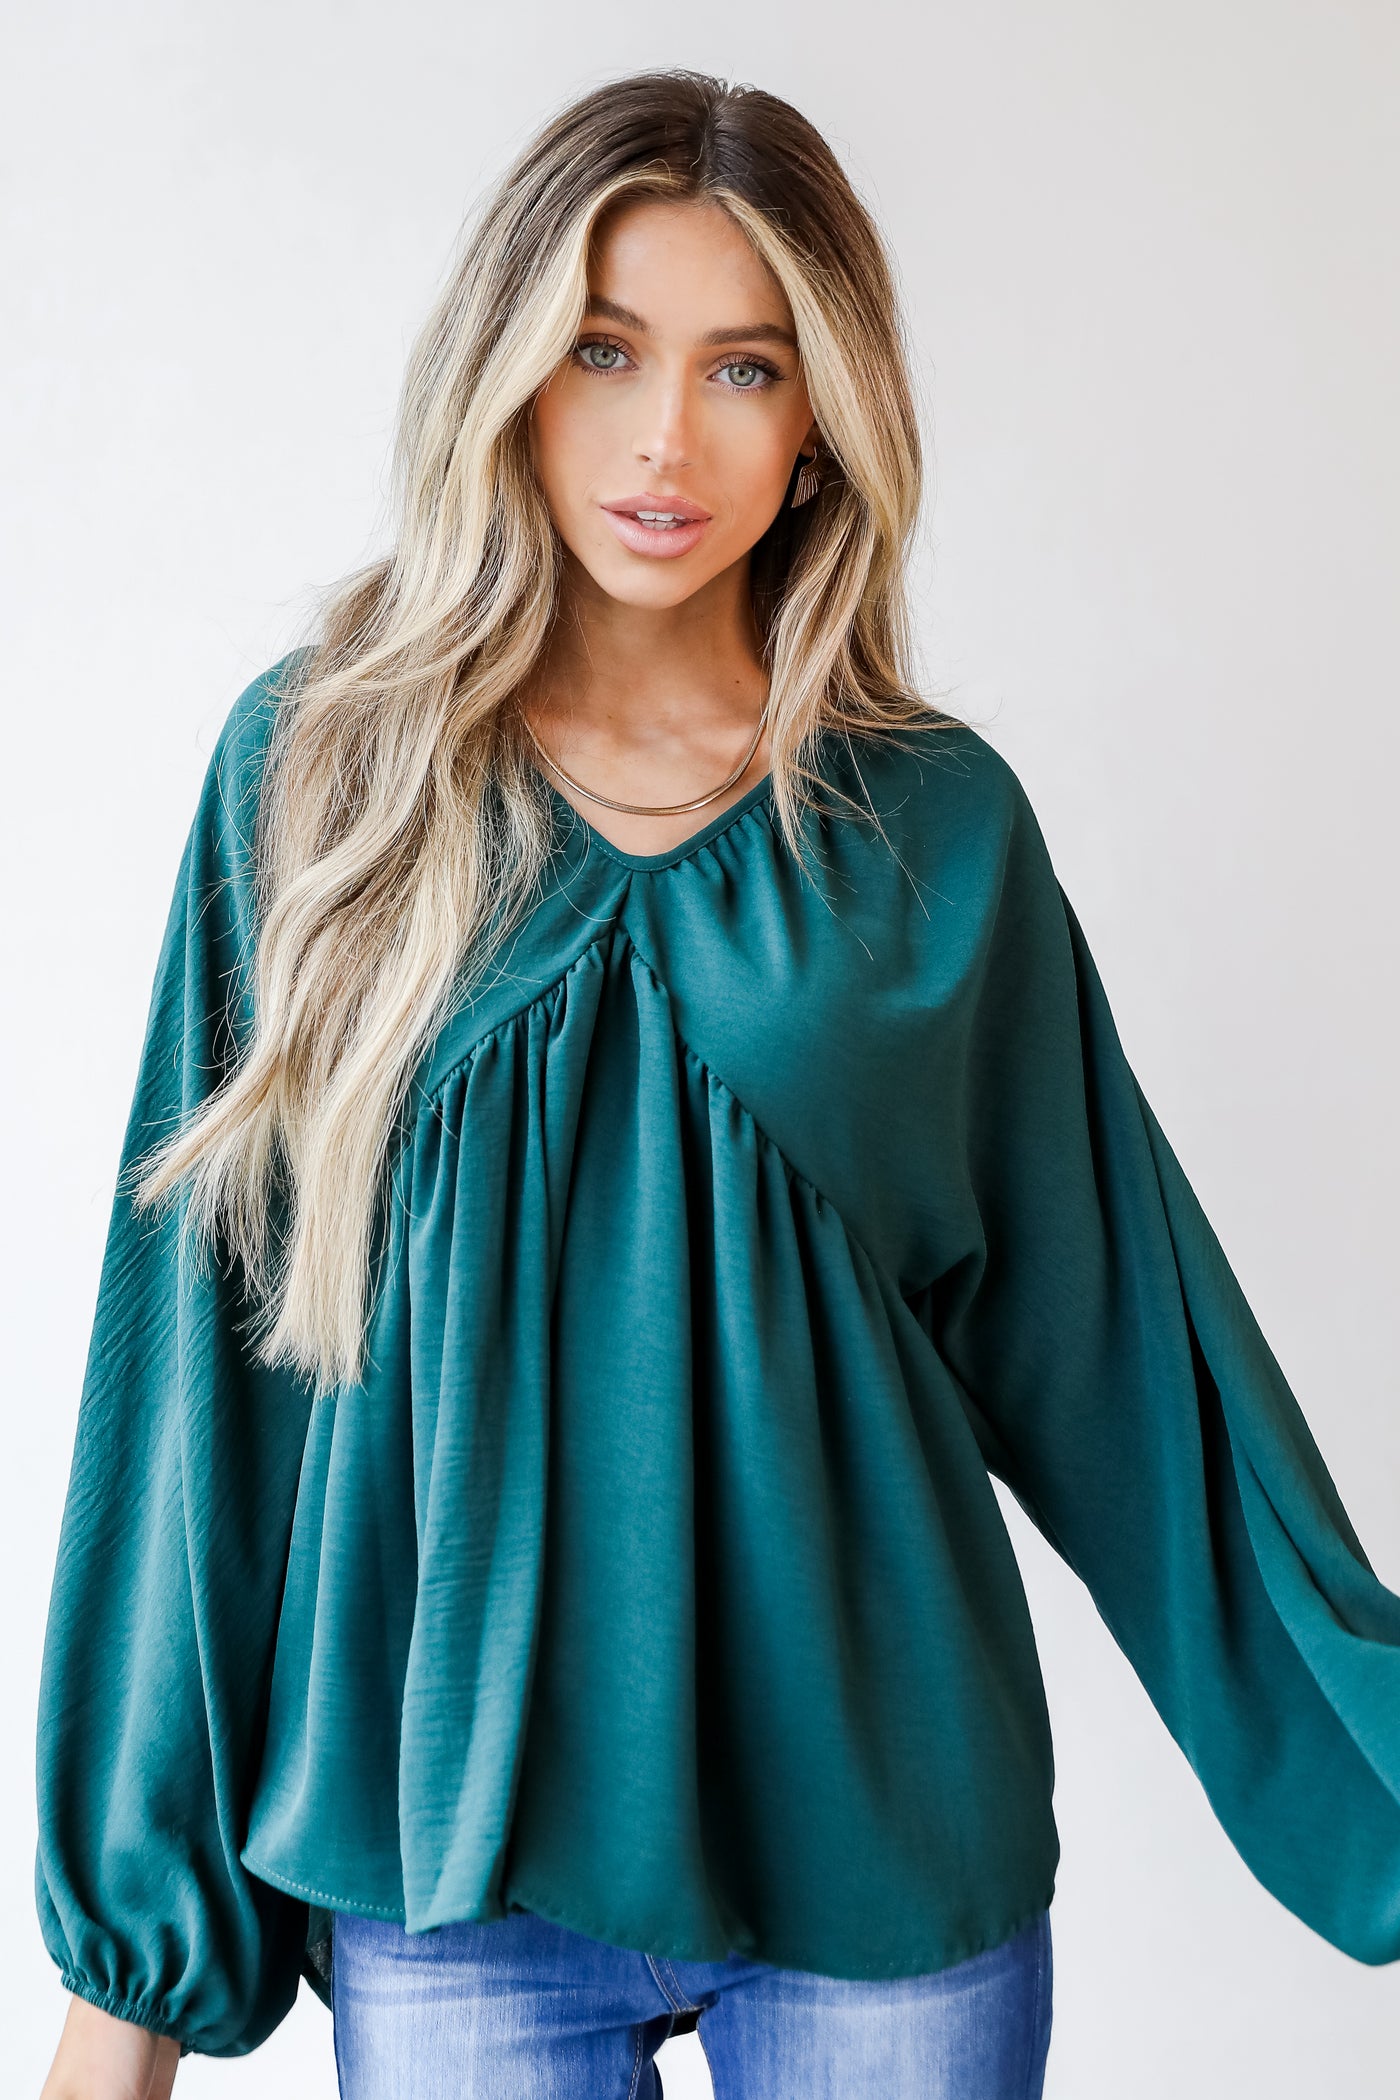 Babydoll Blouse in hunter green front view